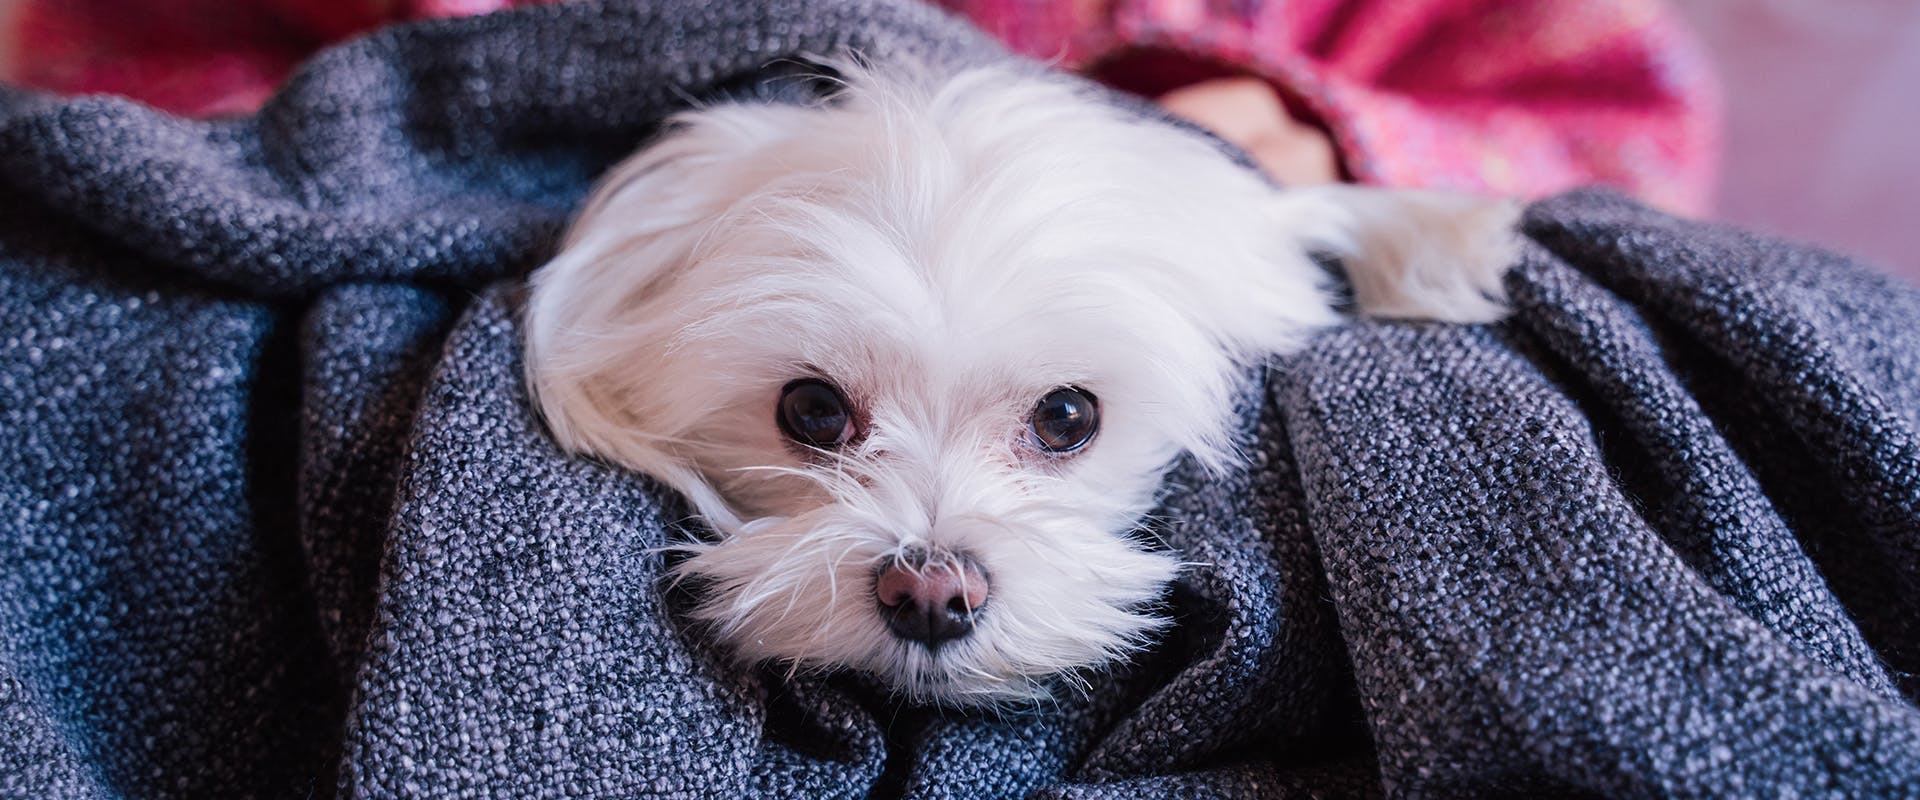 A Maltese dog wrapped up in a grey blanket